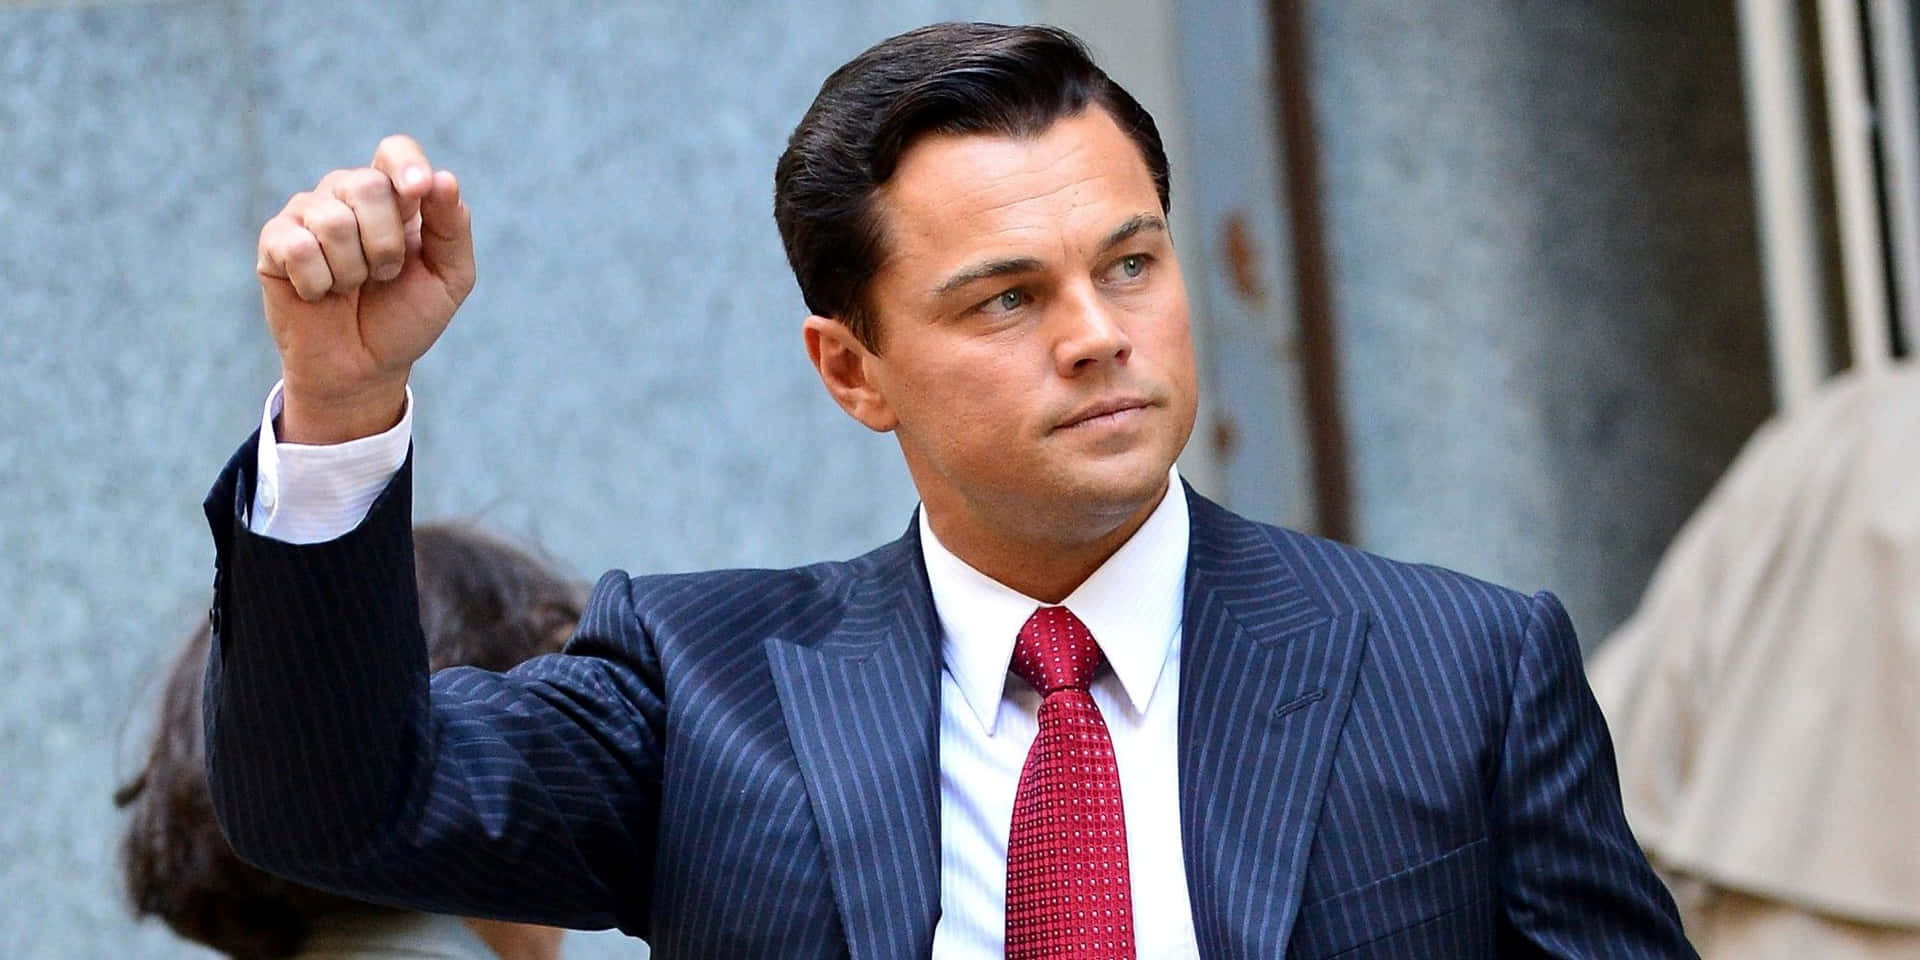 Jordan Belfort, The Notorious Wall Street Broker And The Subject Of The Wolf Of Wall Street Background